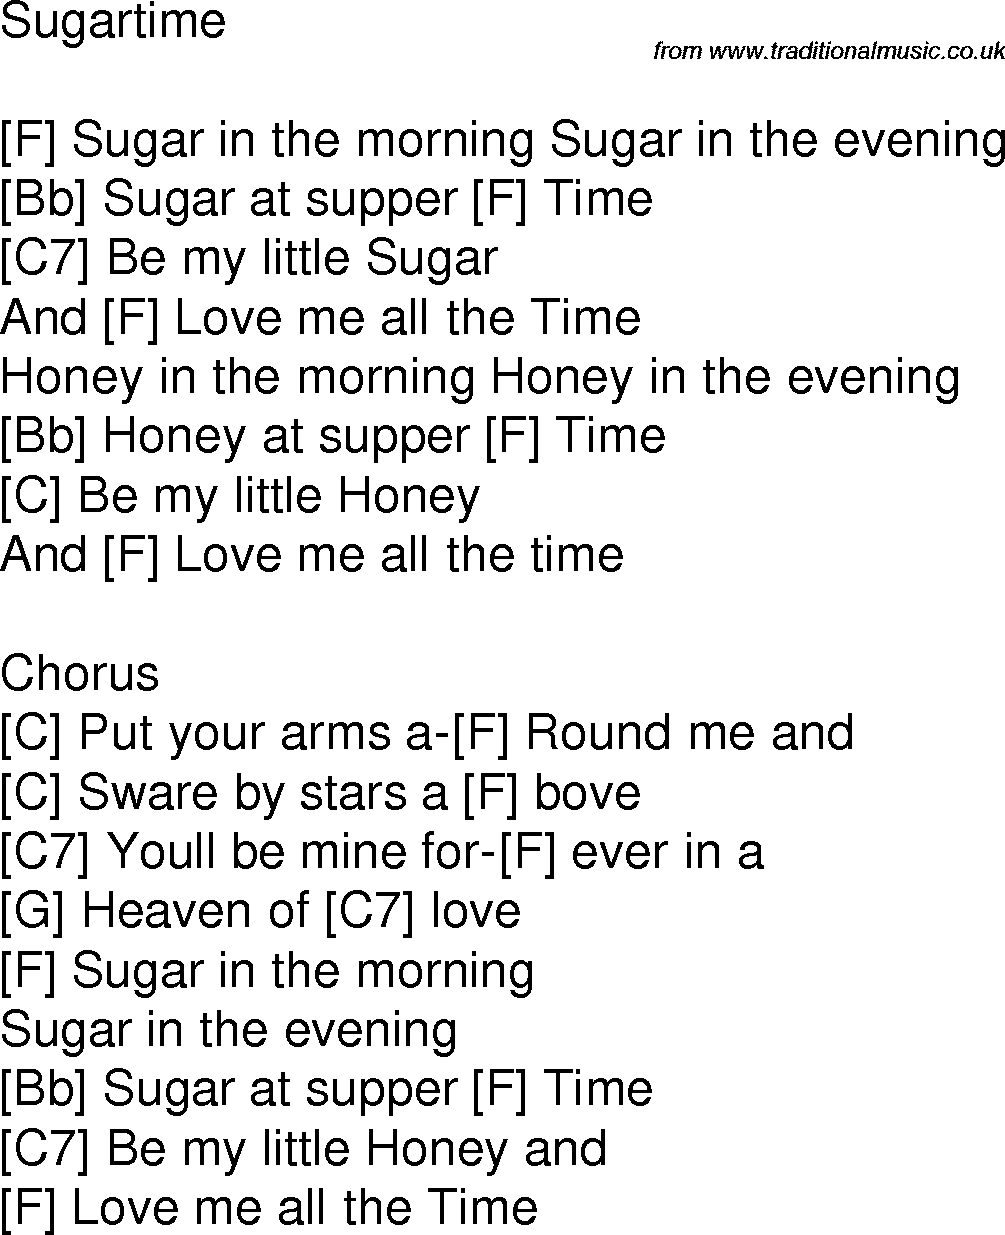 Old time song lyrics with chords for Sugartime F